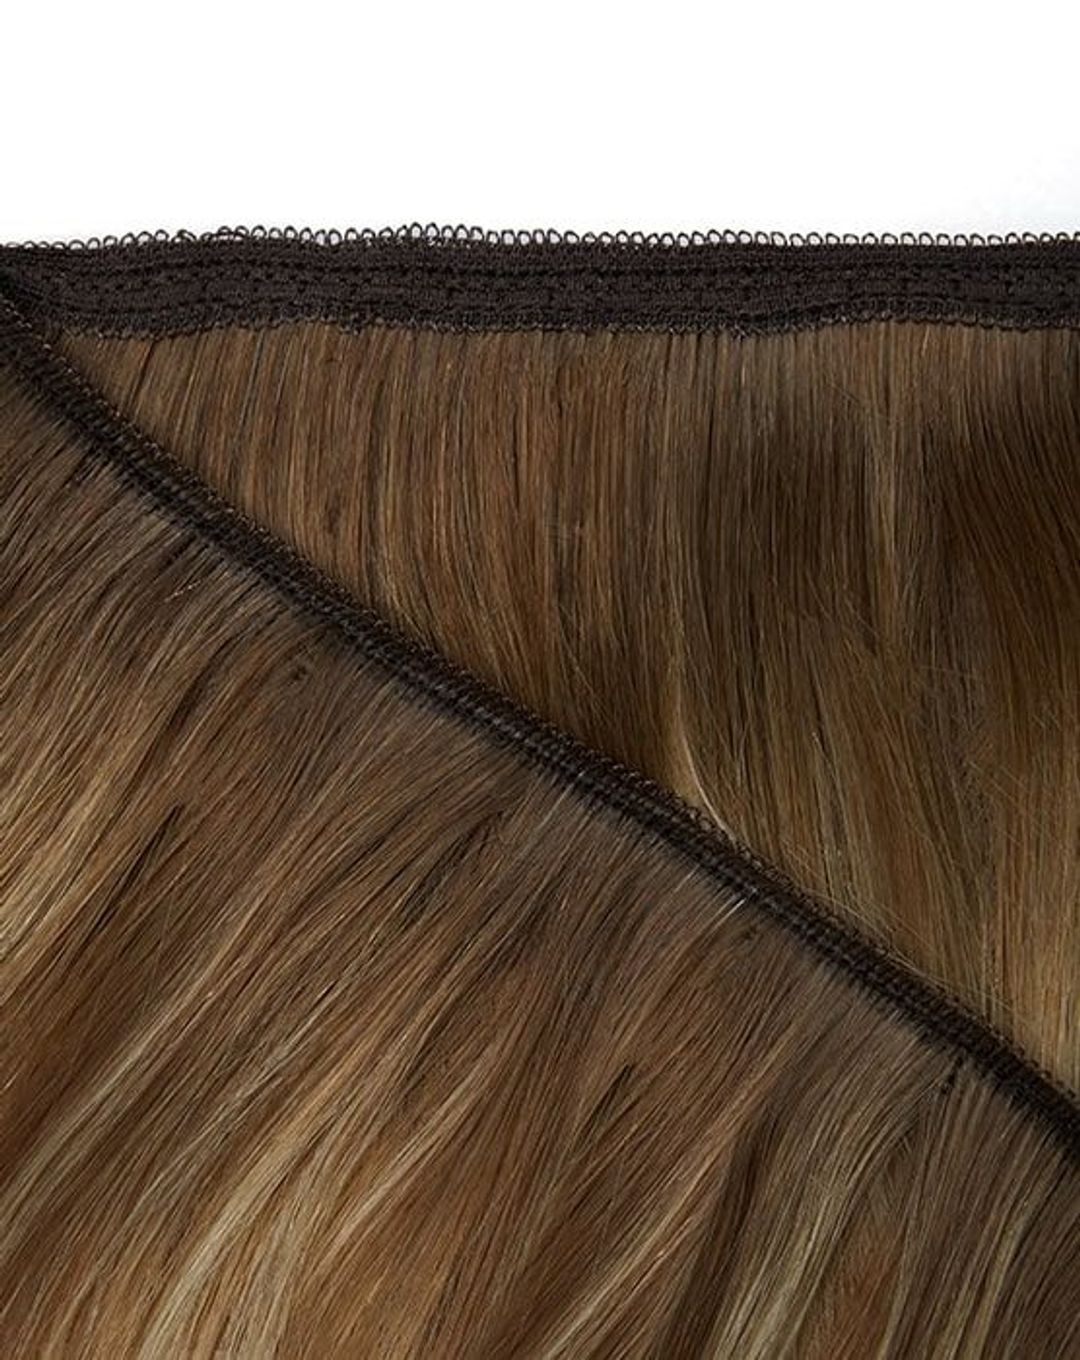 Beauty Works Gold Double Weft Extensions - Chocolate,24"